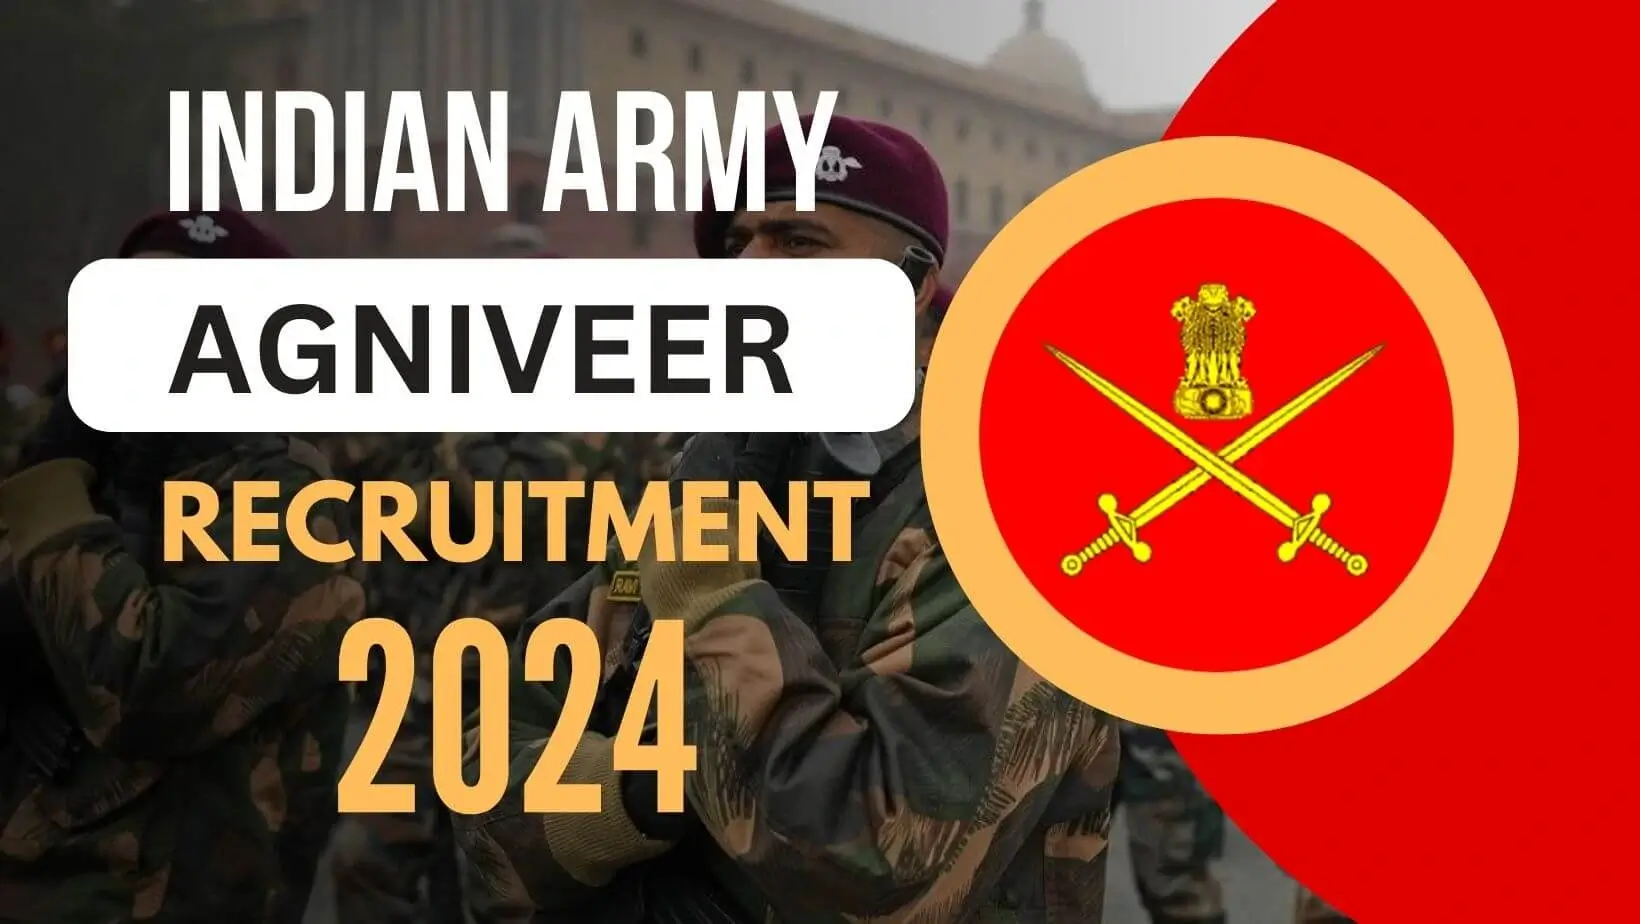 Indian Army Agniveer Recruitment notification 2024 has been released. All you need to know about the eligibility criteria, age limits, education qualification, etc.